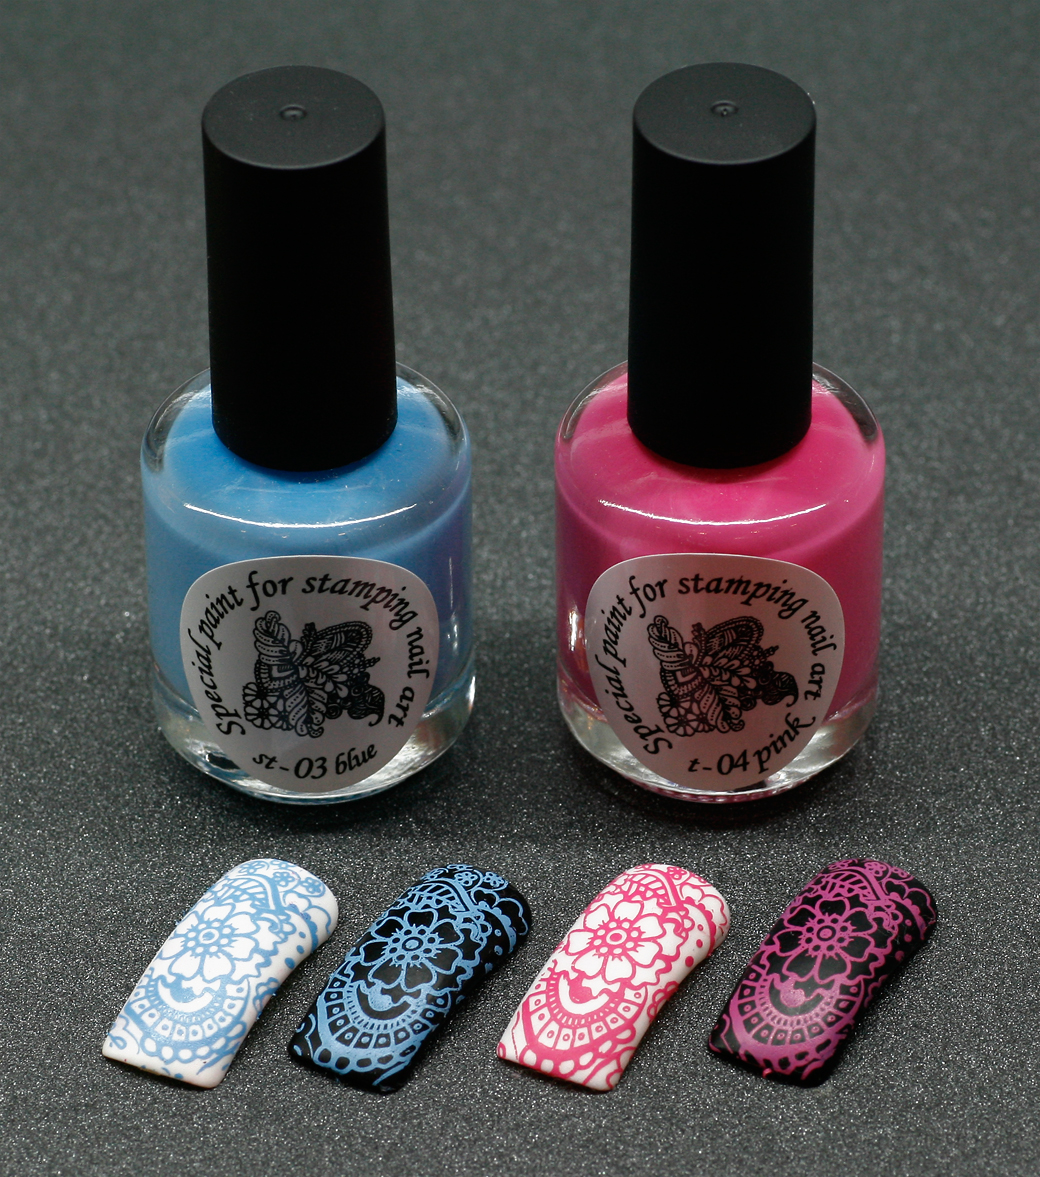 EL Corazon Kaleidoscope Special paint for stamping nail art №st-03 blue, №st-04 pink